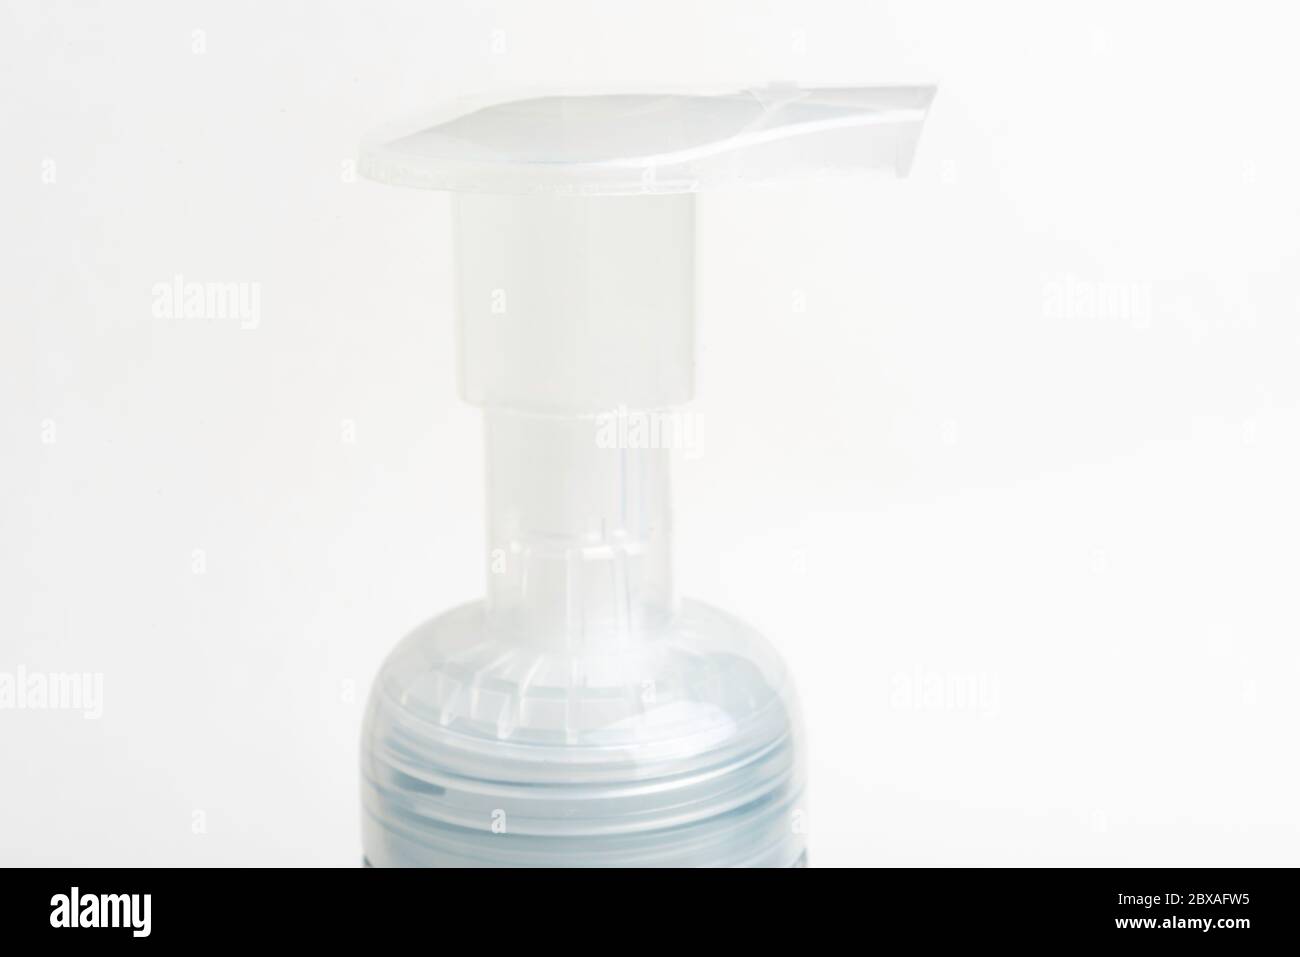 A close-up image of the translucent top pump of a foam soap plastic bottle dispenser set on a white background. Stock Photo